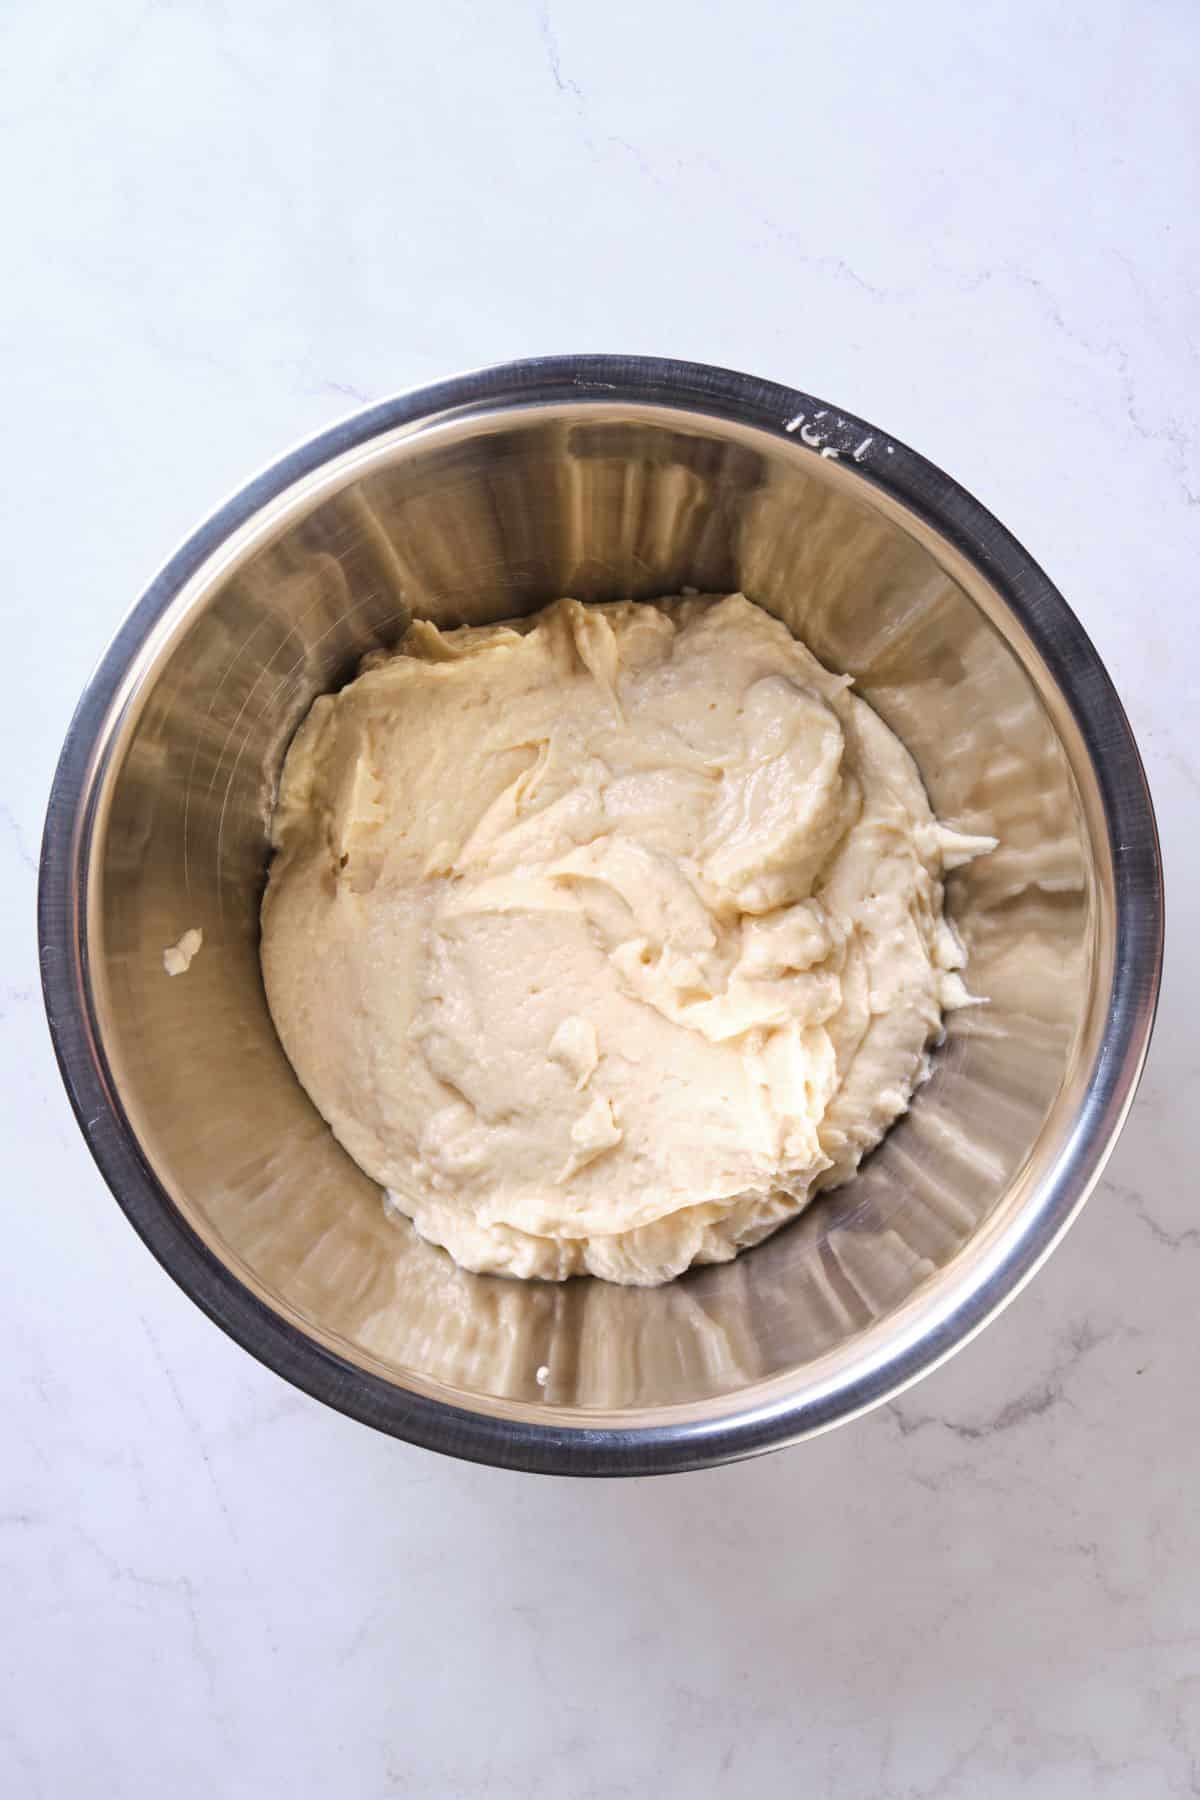 cake batter after adding the wet and dry ingredients for the traditional creaming method.